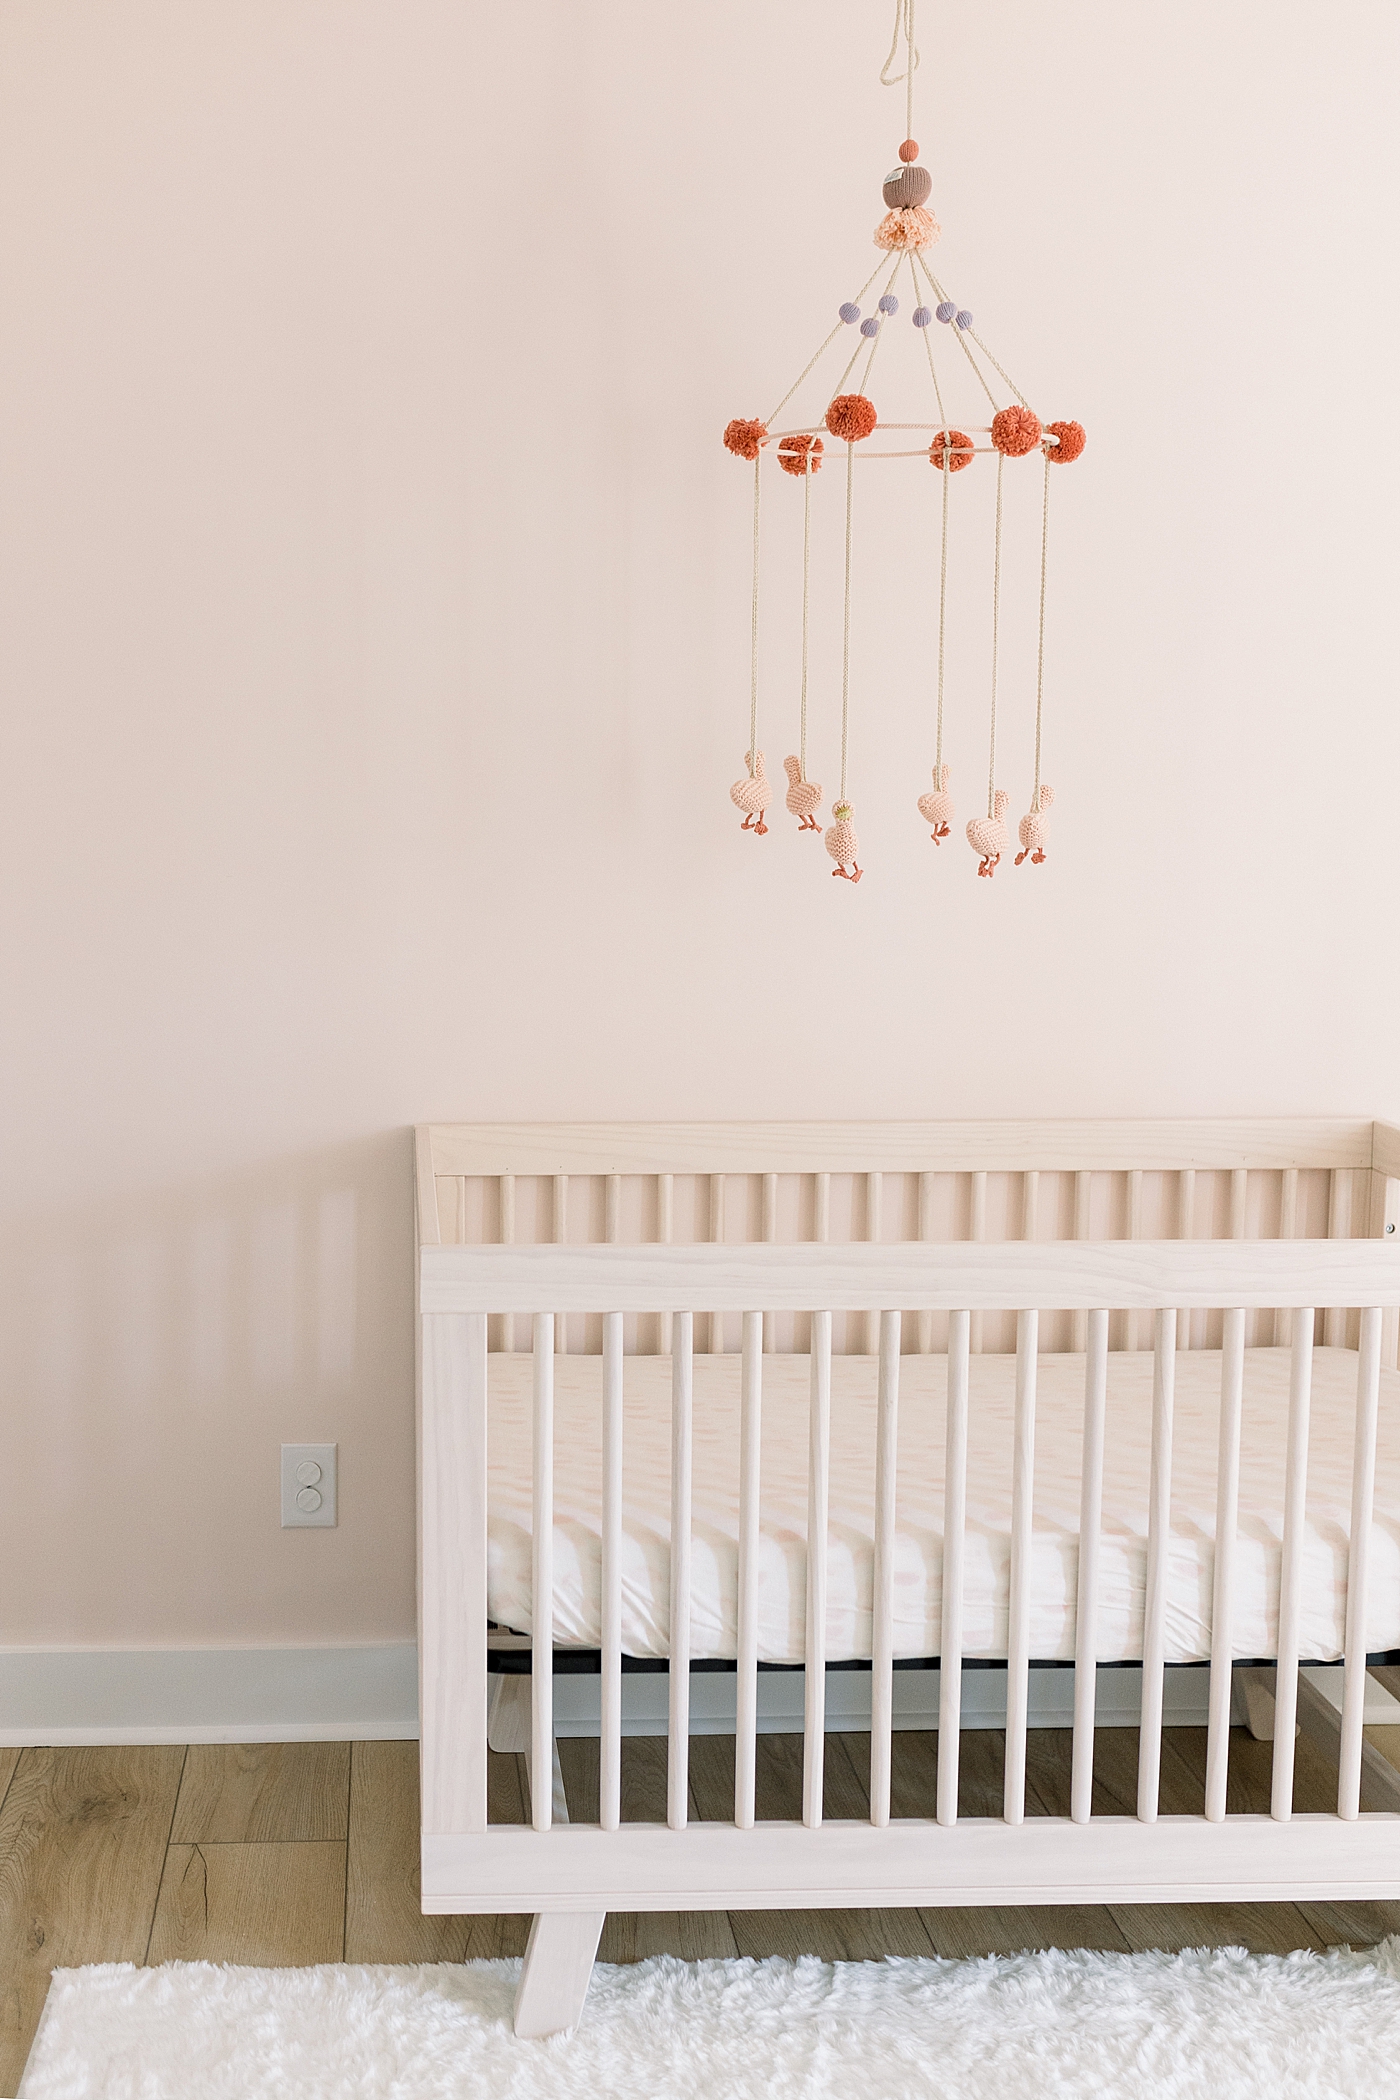 Details of baby's crib in pink nursery | Image by Caitlyn Motycka